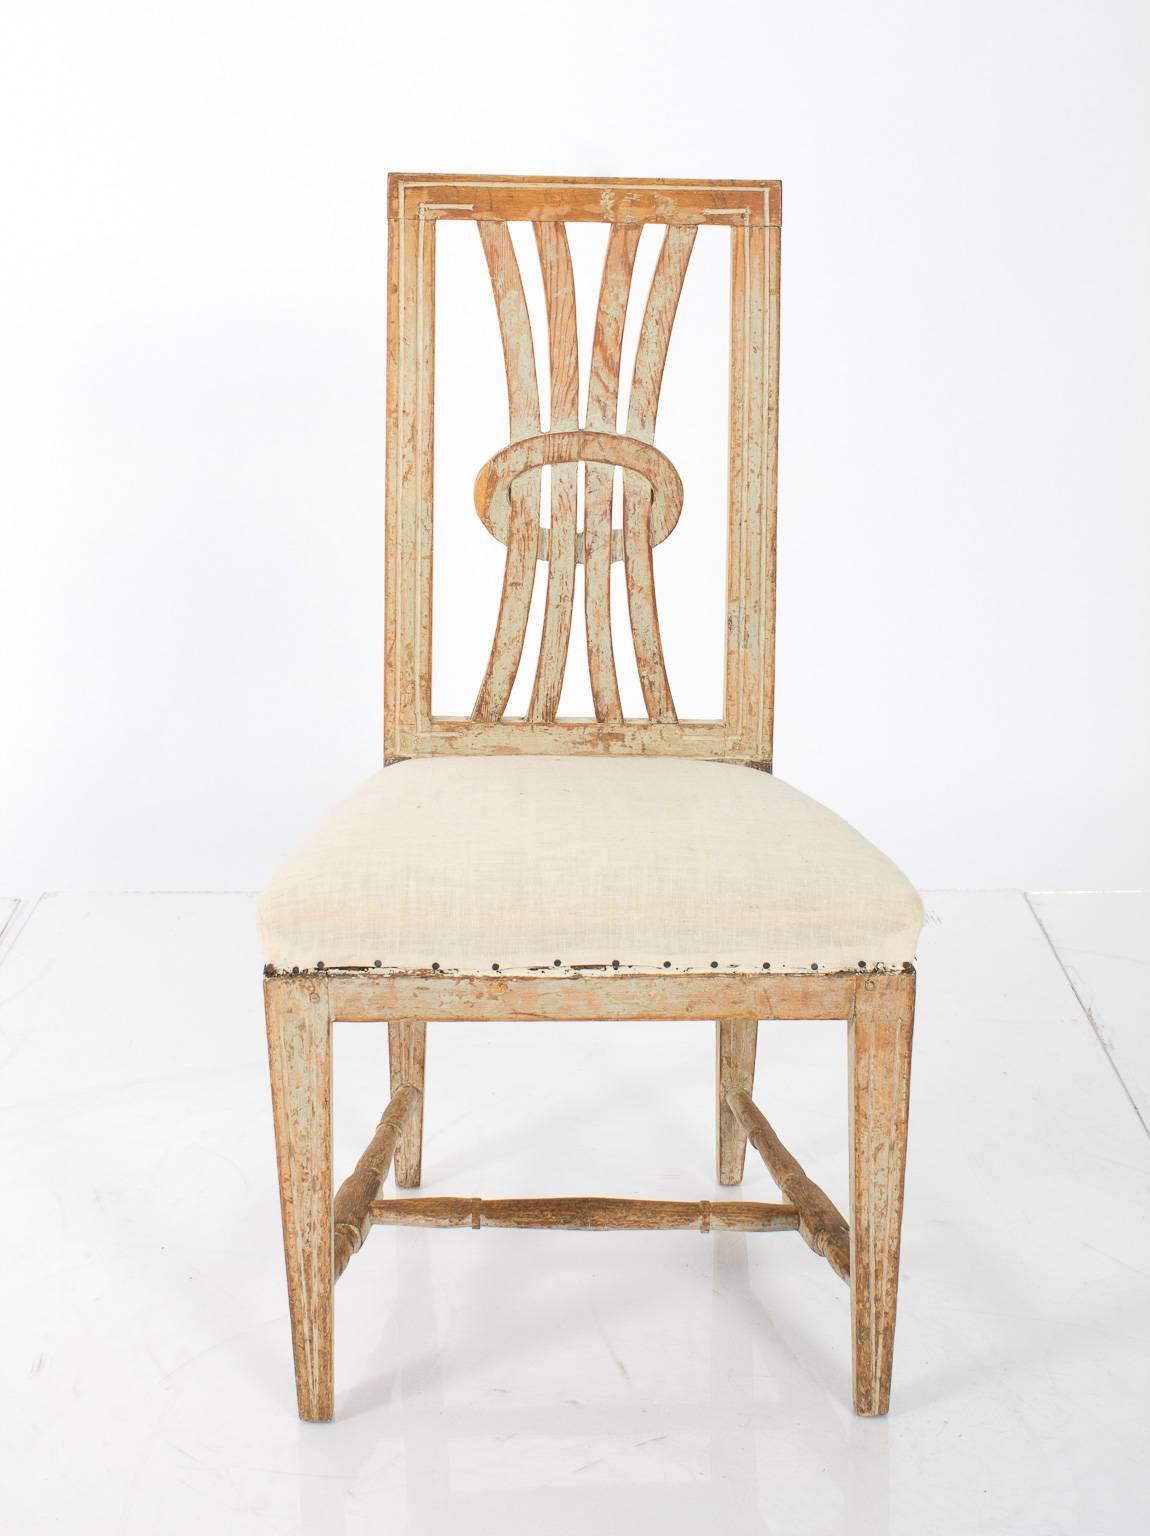 Early 19th century pair of white-painted late Gustavian chairs with open back work.